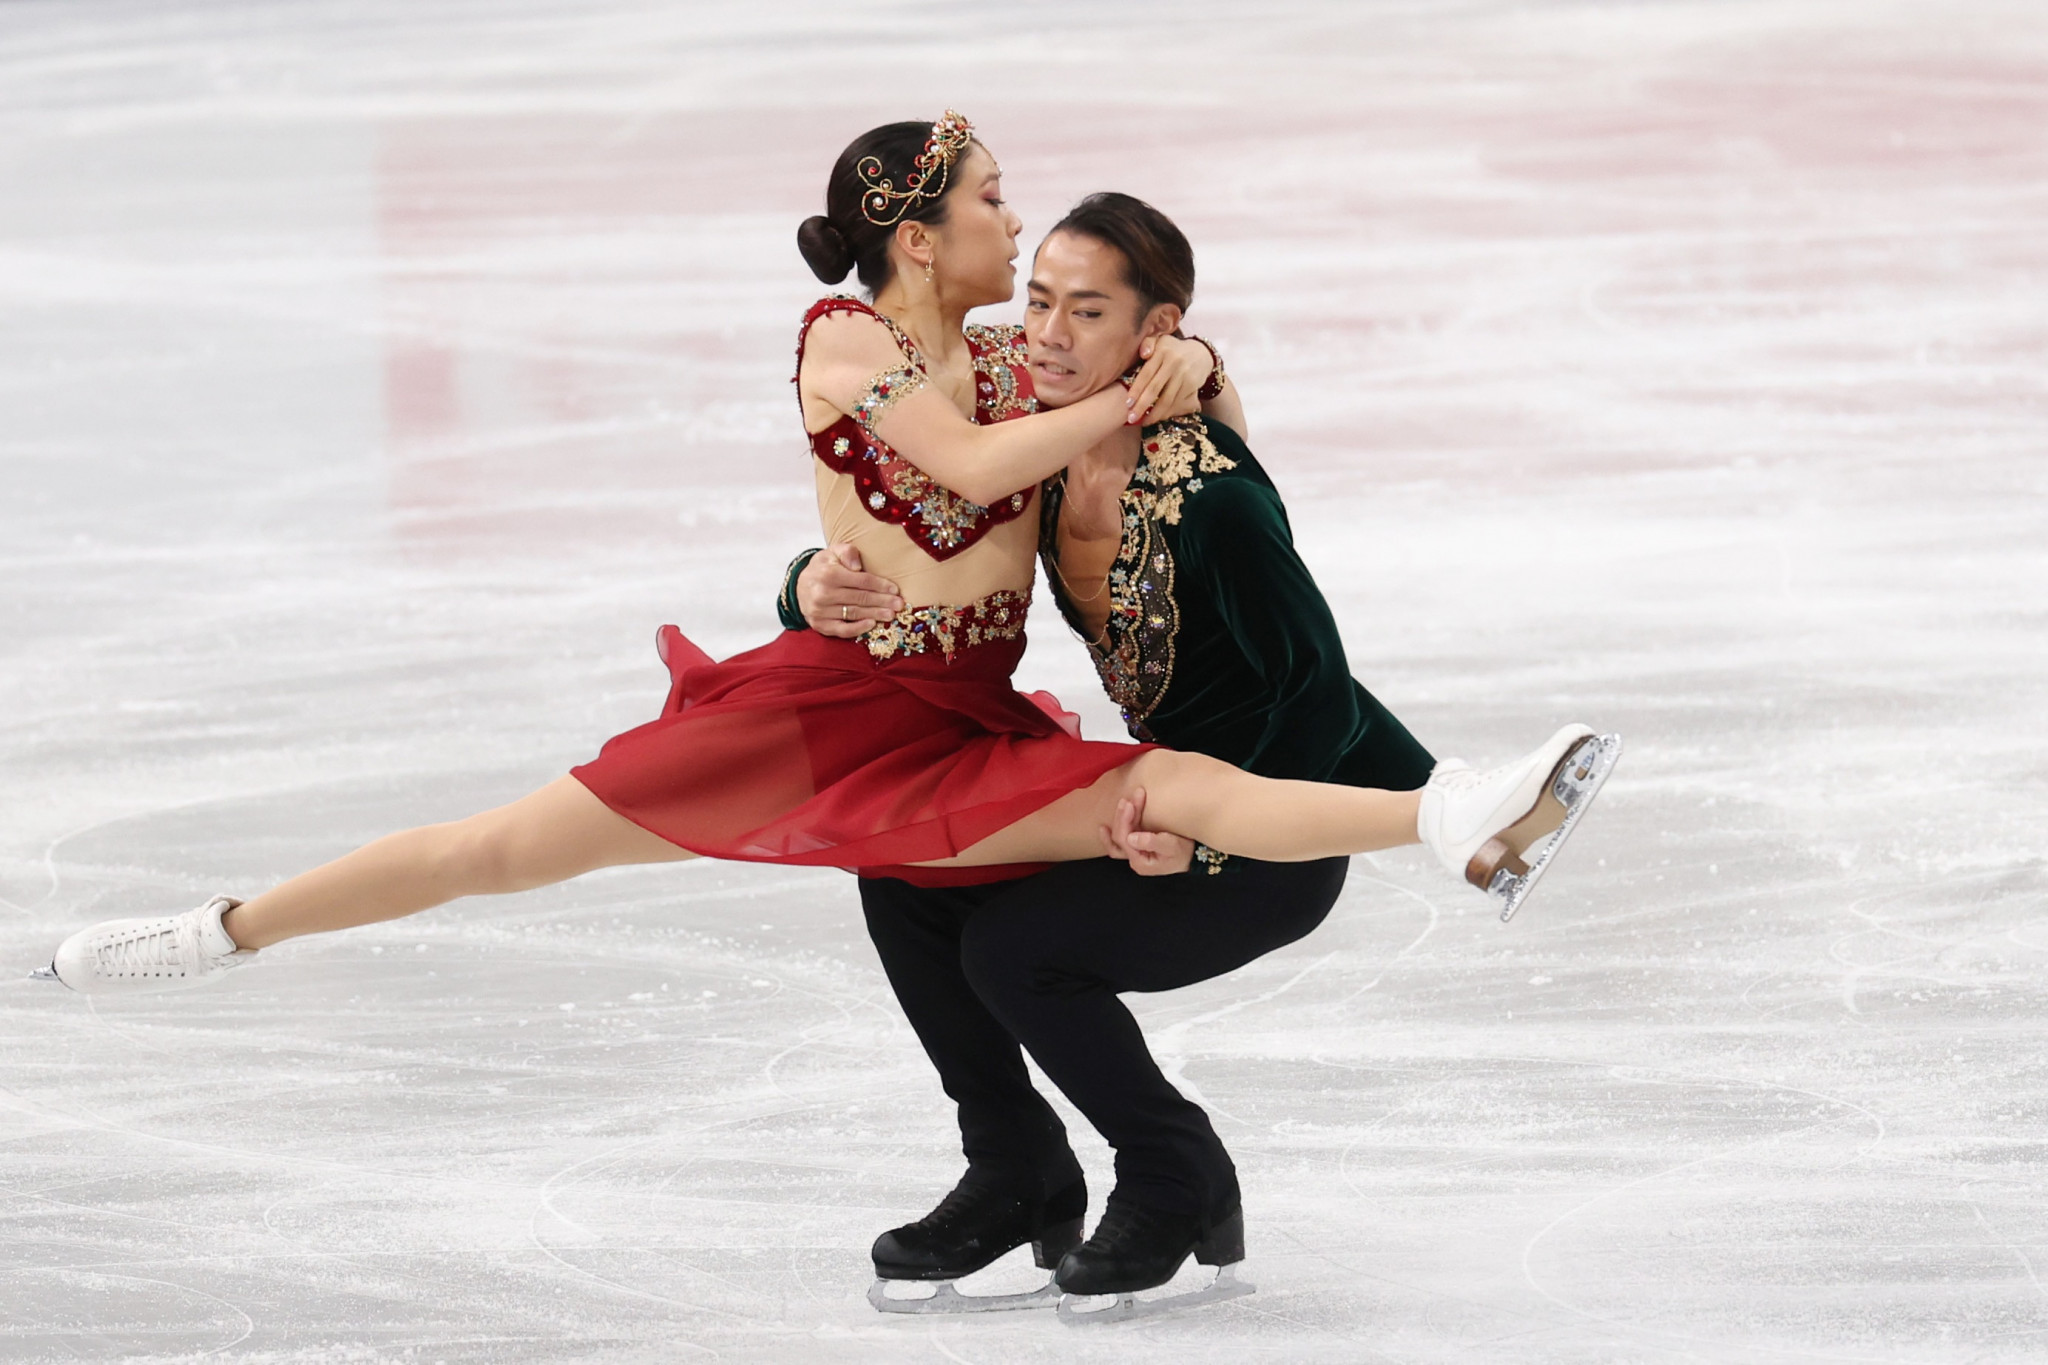 Olympic bronze medallist Daisuke Takahashi will be teaming up with Kana Muramoto in the ice dance event in Estonia ©Getty Images